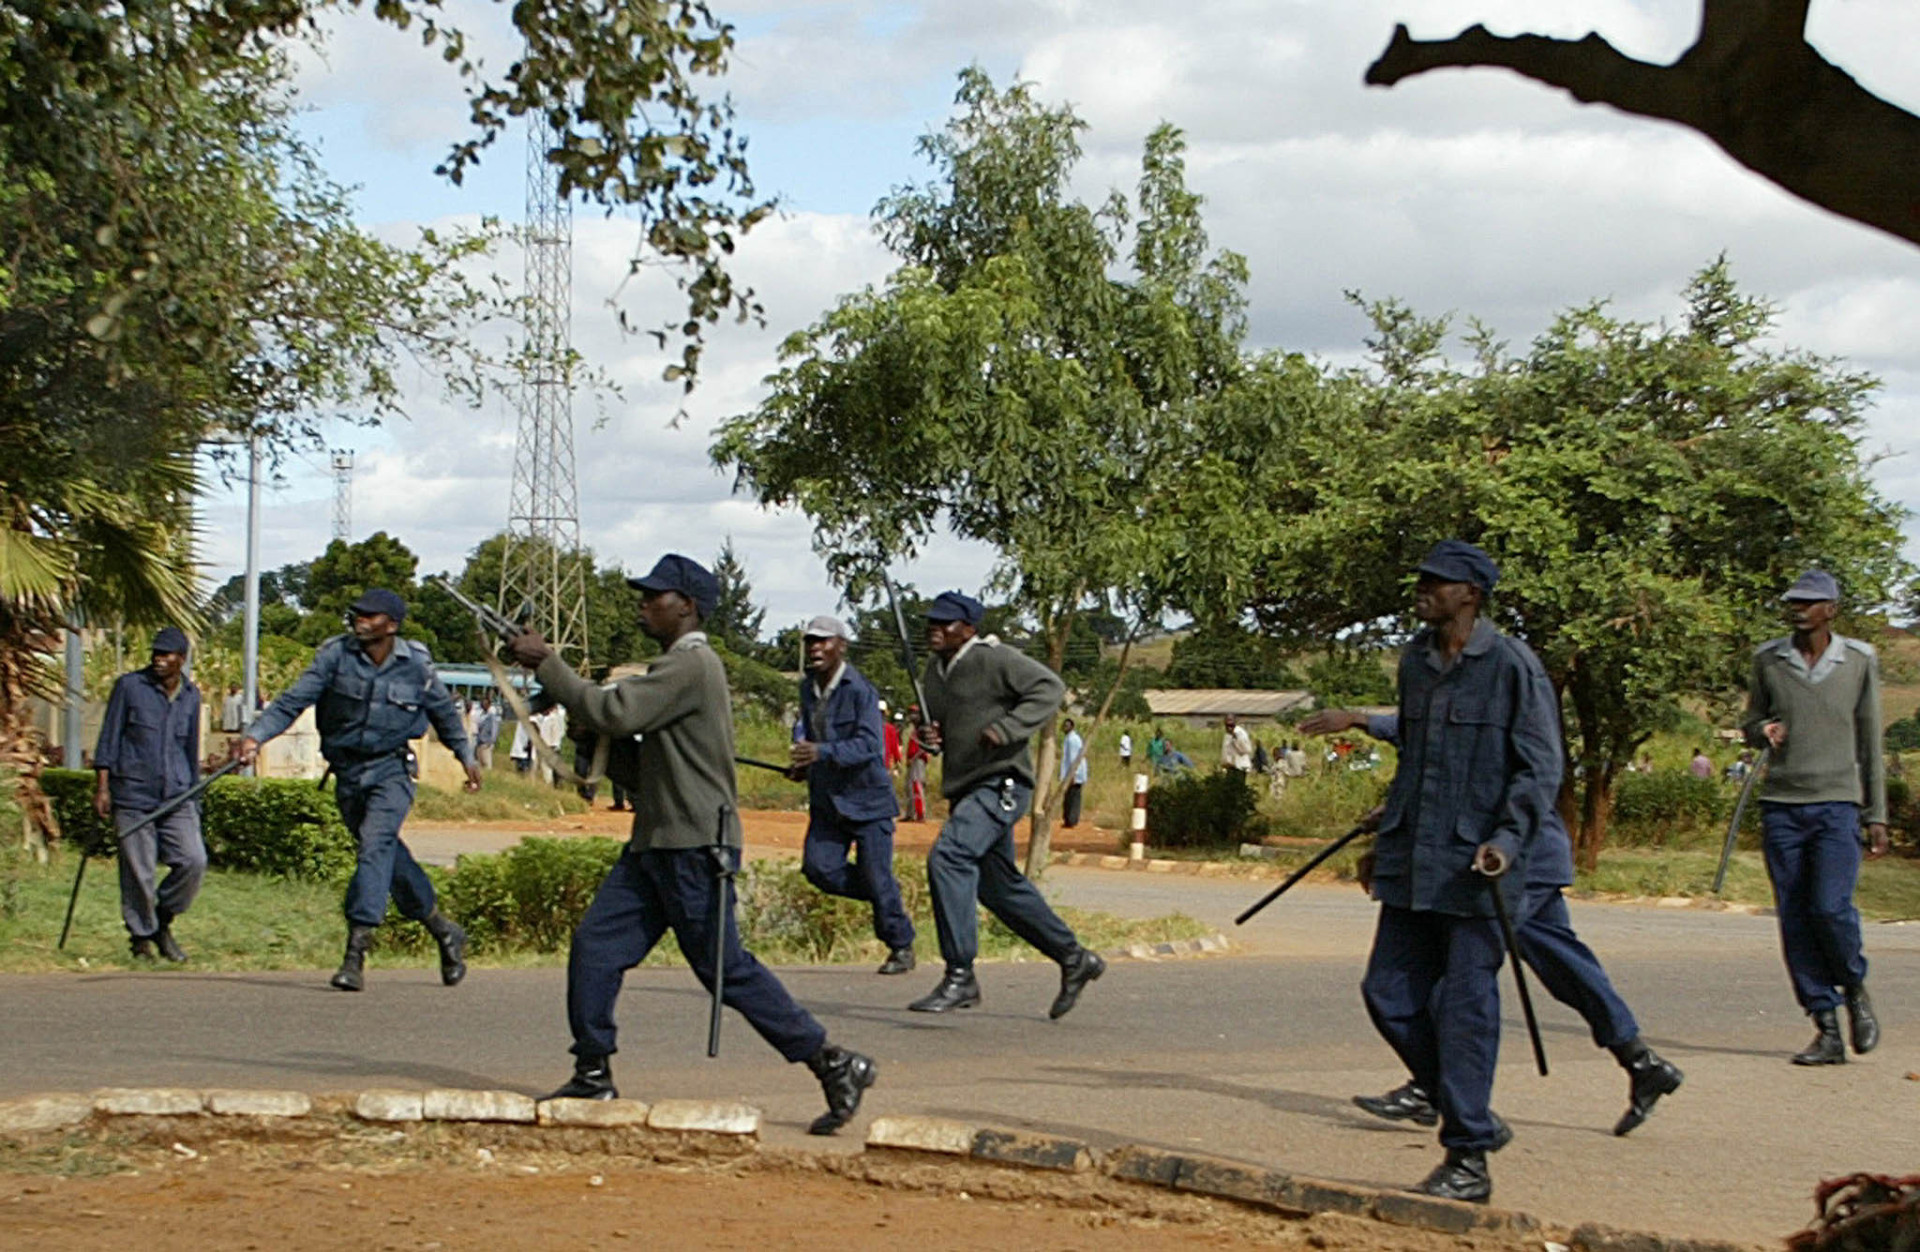 <p><span>Zimbabwe's historic capital, Harare, with a Crime Index score of 60.6, has landed itself on the list of Africa's most dangerous cities, thanks to its constant threat of street crimes.</span></p><p><a href="https://www.msn.com/en-us/community/channel/vid-7xx8mnucu55yw63we9va2gwr7uihbxwc68fxqp25x6tg4ftibpra?cvid=94631541bc0f4f89bfd59158d696ad7e">Follow us and access great exclusive content every day</a></p>